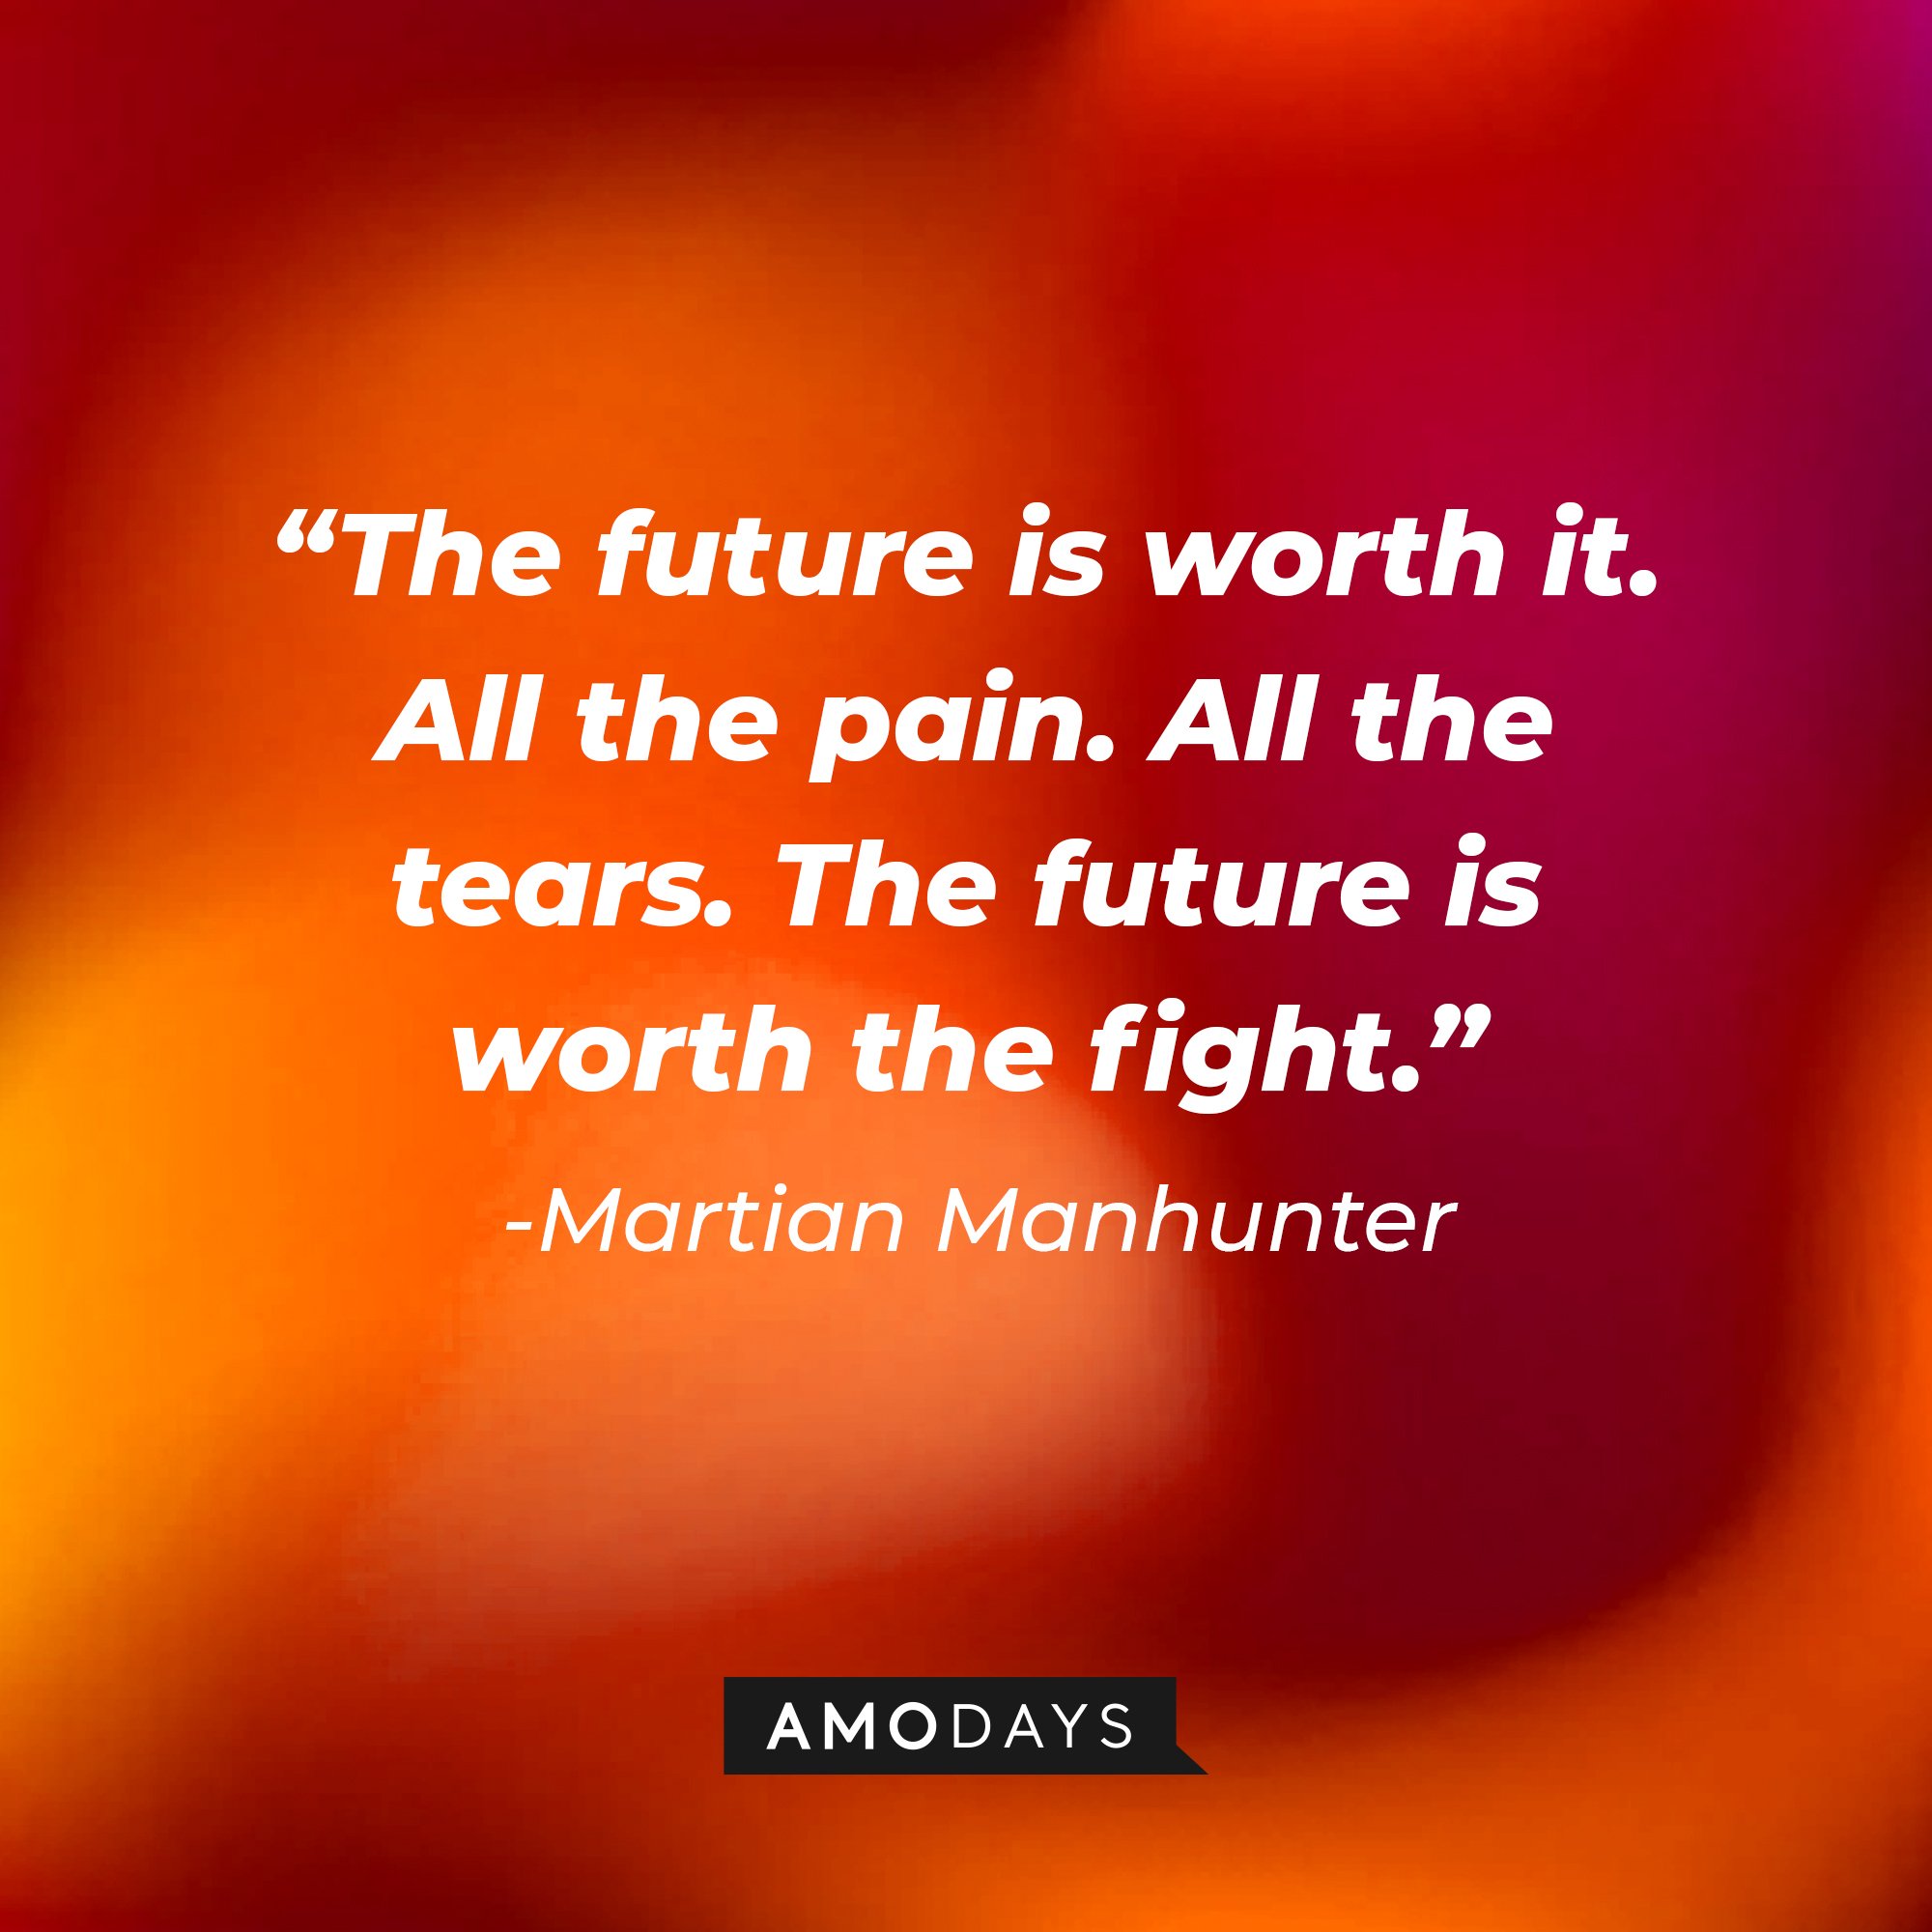 Martian Manhunter's quote: “The future is worth it. All the pain. All the tears. The future is worth the fight.” | Image: AmoDays